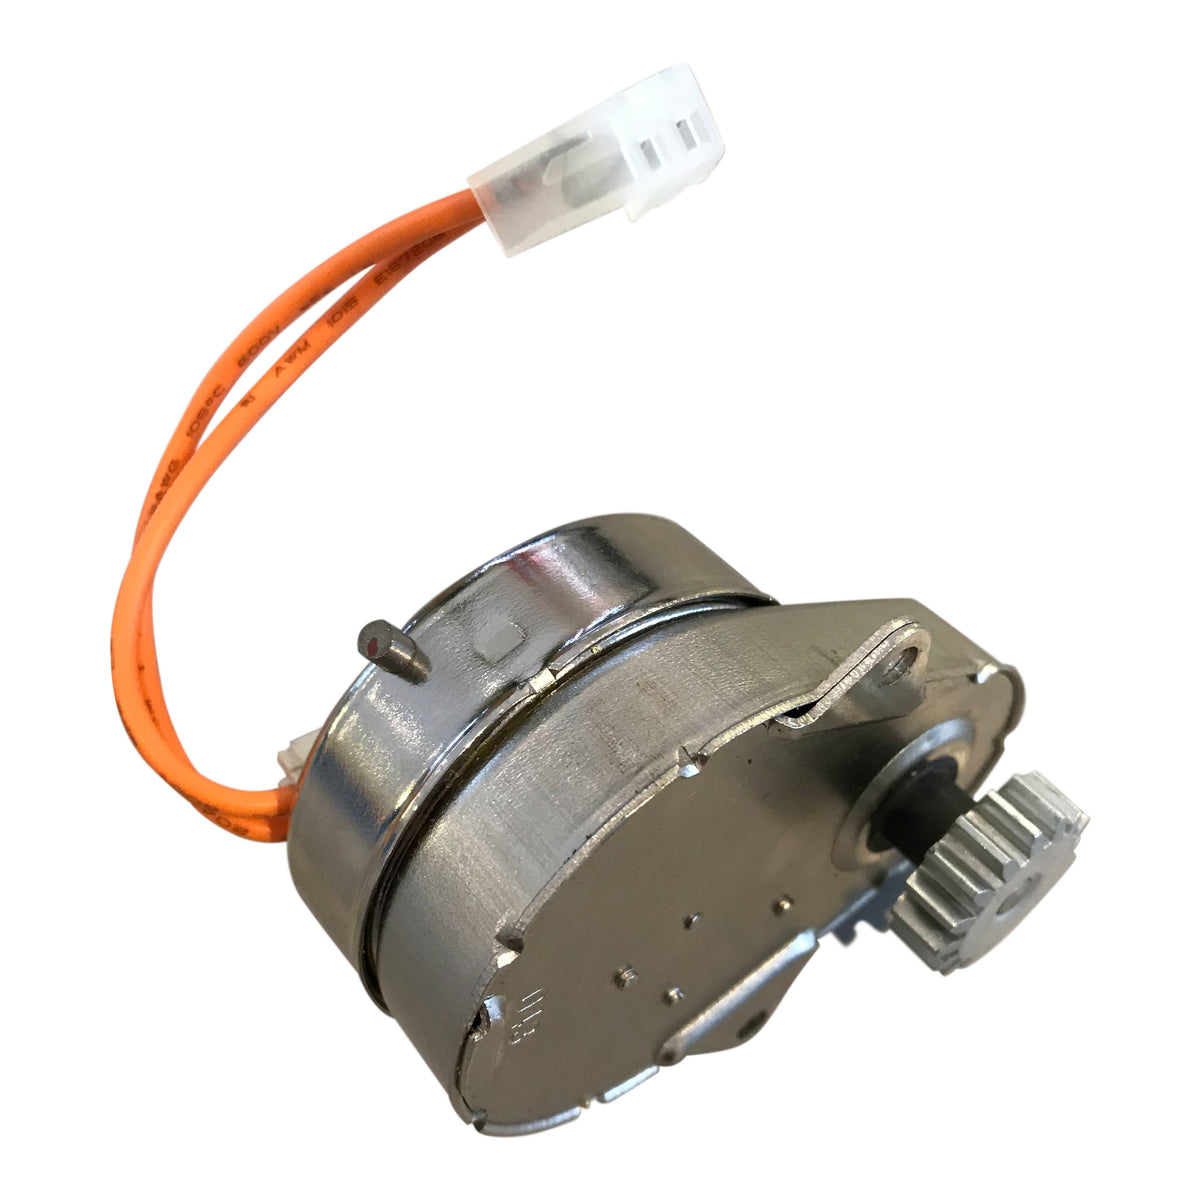 Aquamaster Drive Motor 90217 for AMS 700, 900 or 950